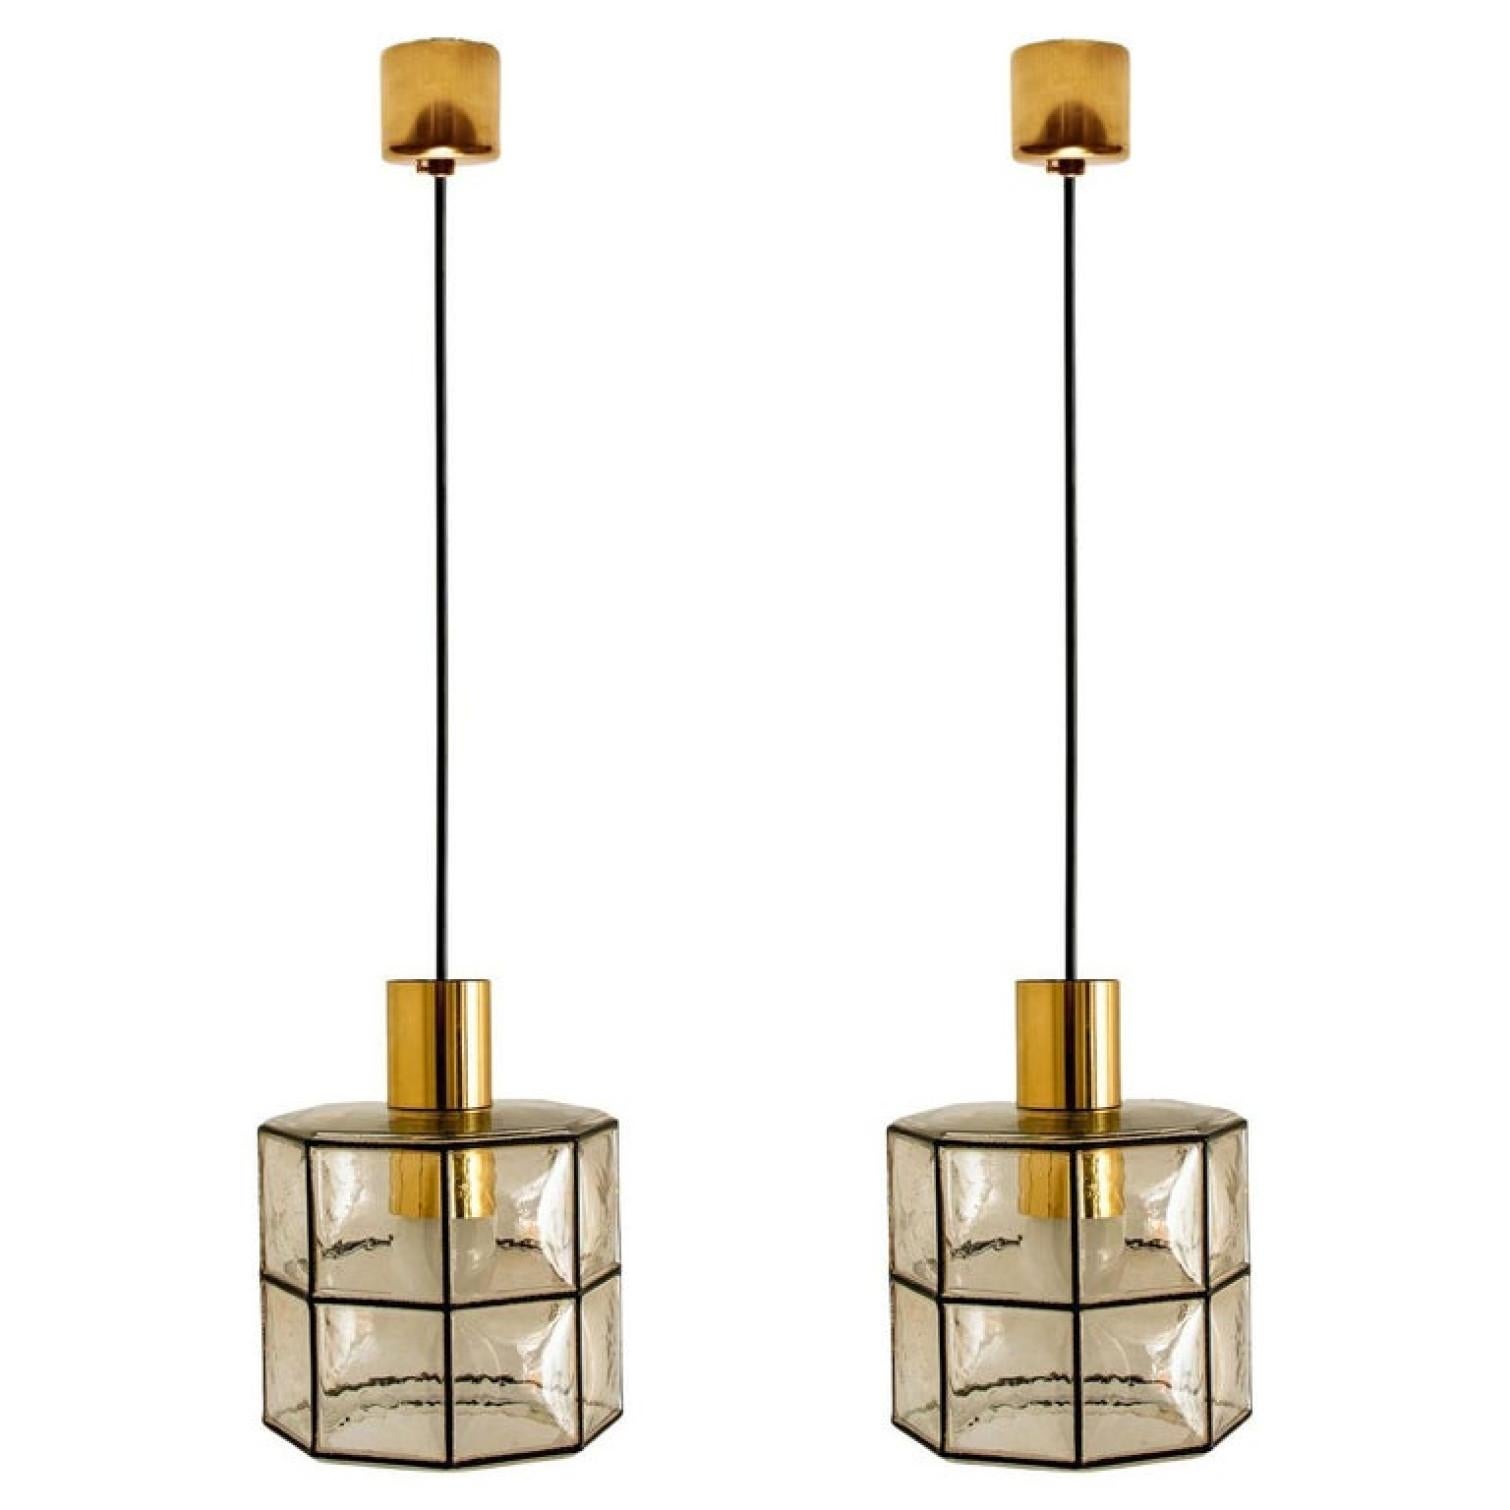 Pair of pendant lamps by Glashütte Limburg, Germany. Topaz (gold brown) tone. Bubble glass with a polished brass fixture. Beautiful craftsmanshi of the 20th century.

Heavy quality and in perfect condition. Cleaned, well-wired and ready to